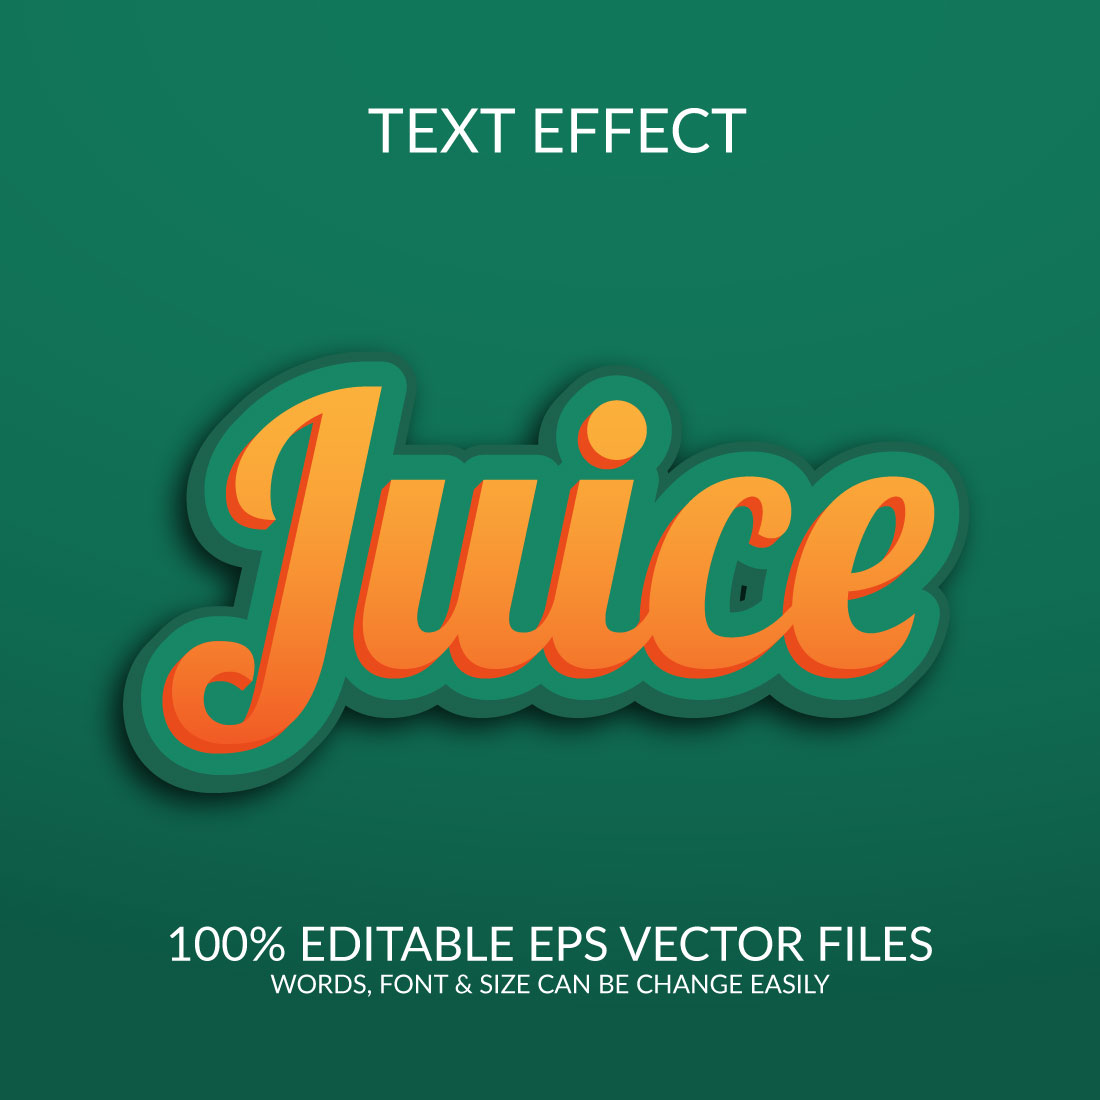 Juice 3d Fully Editable Vector Text Effect Template Design cover image.